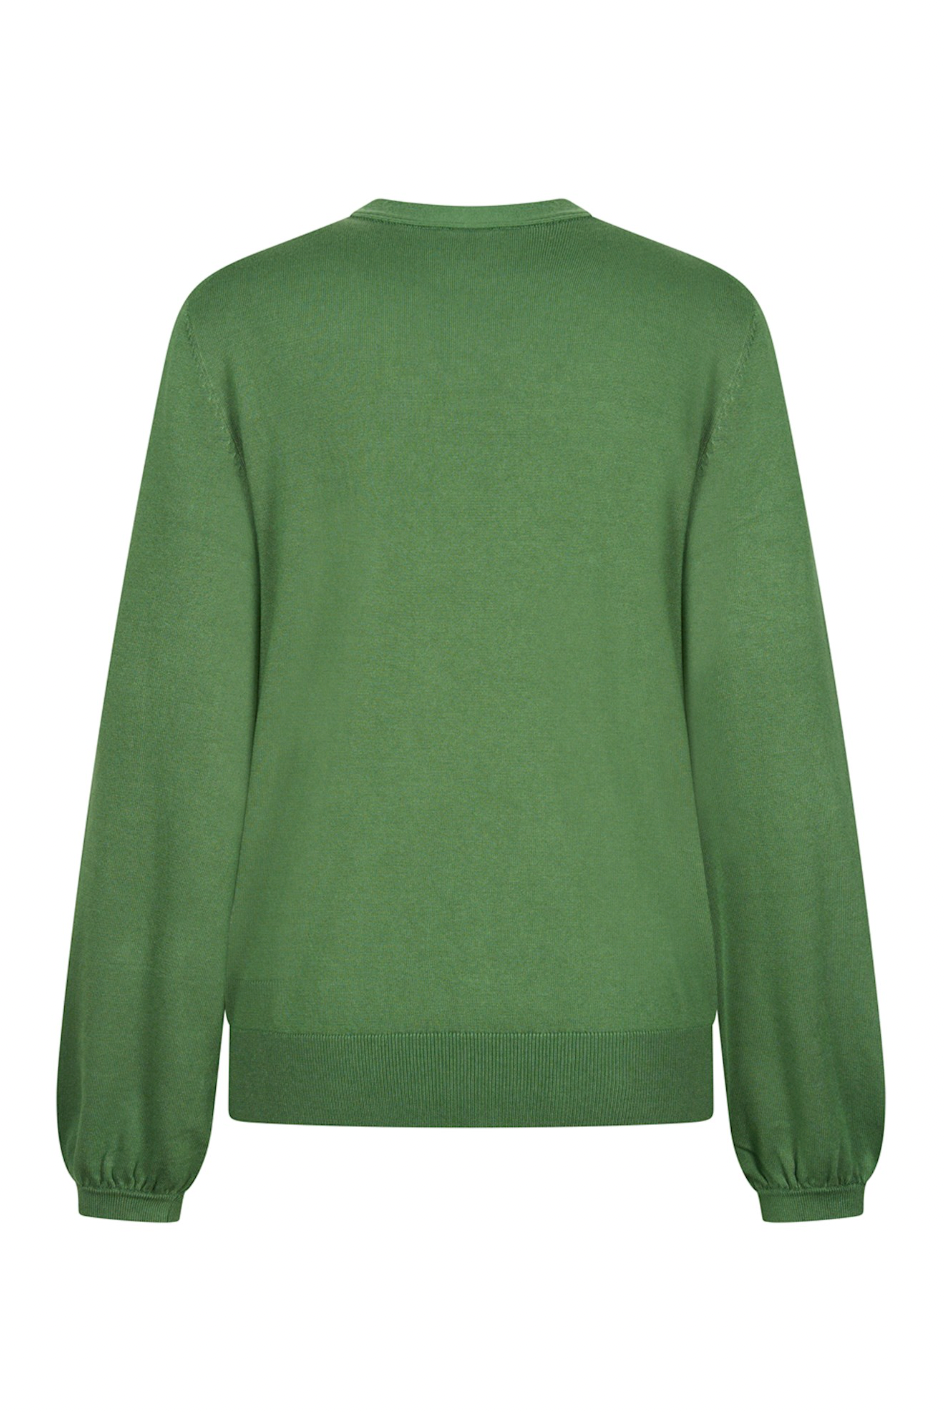 Zilch Sweater Ribbon in Pesto-Womens-Ohh! By Gum - Shop Sustainable